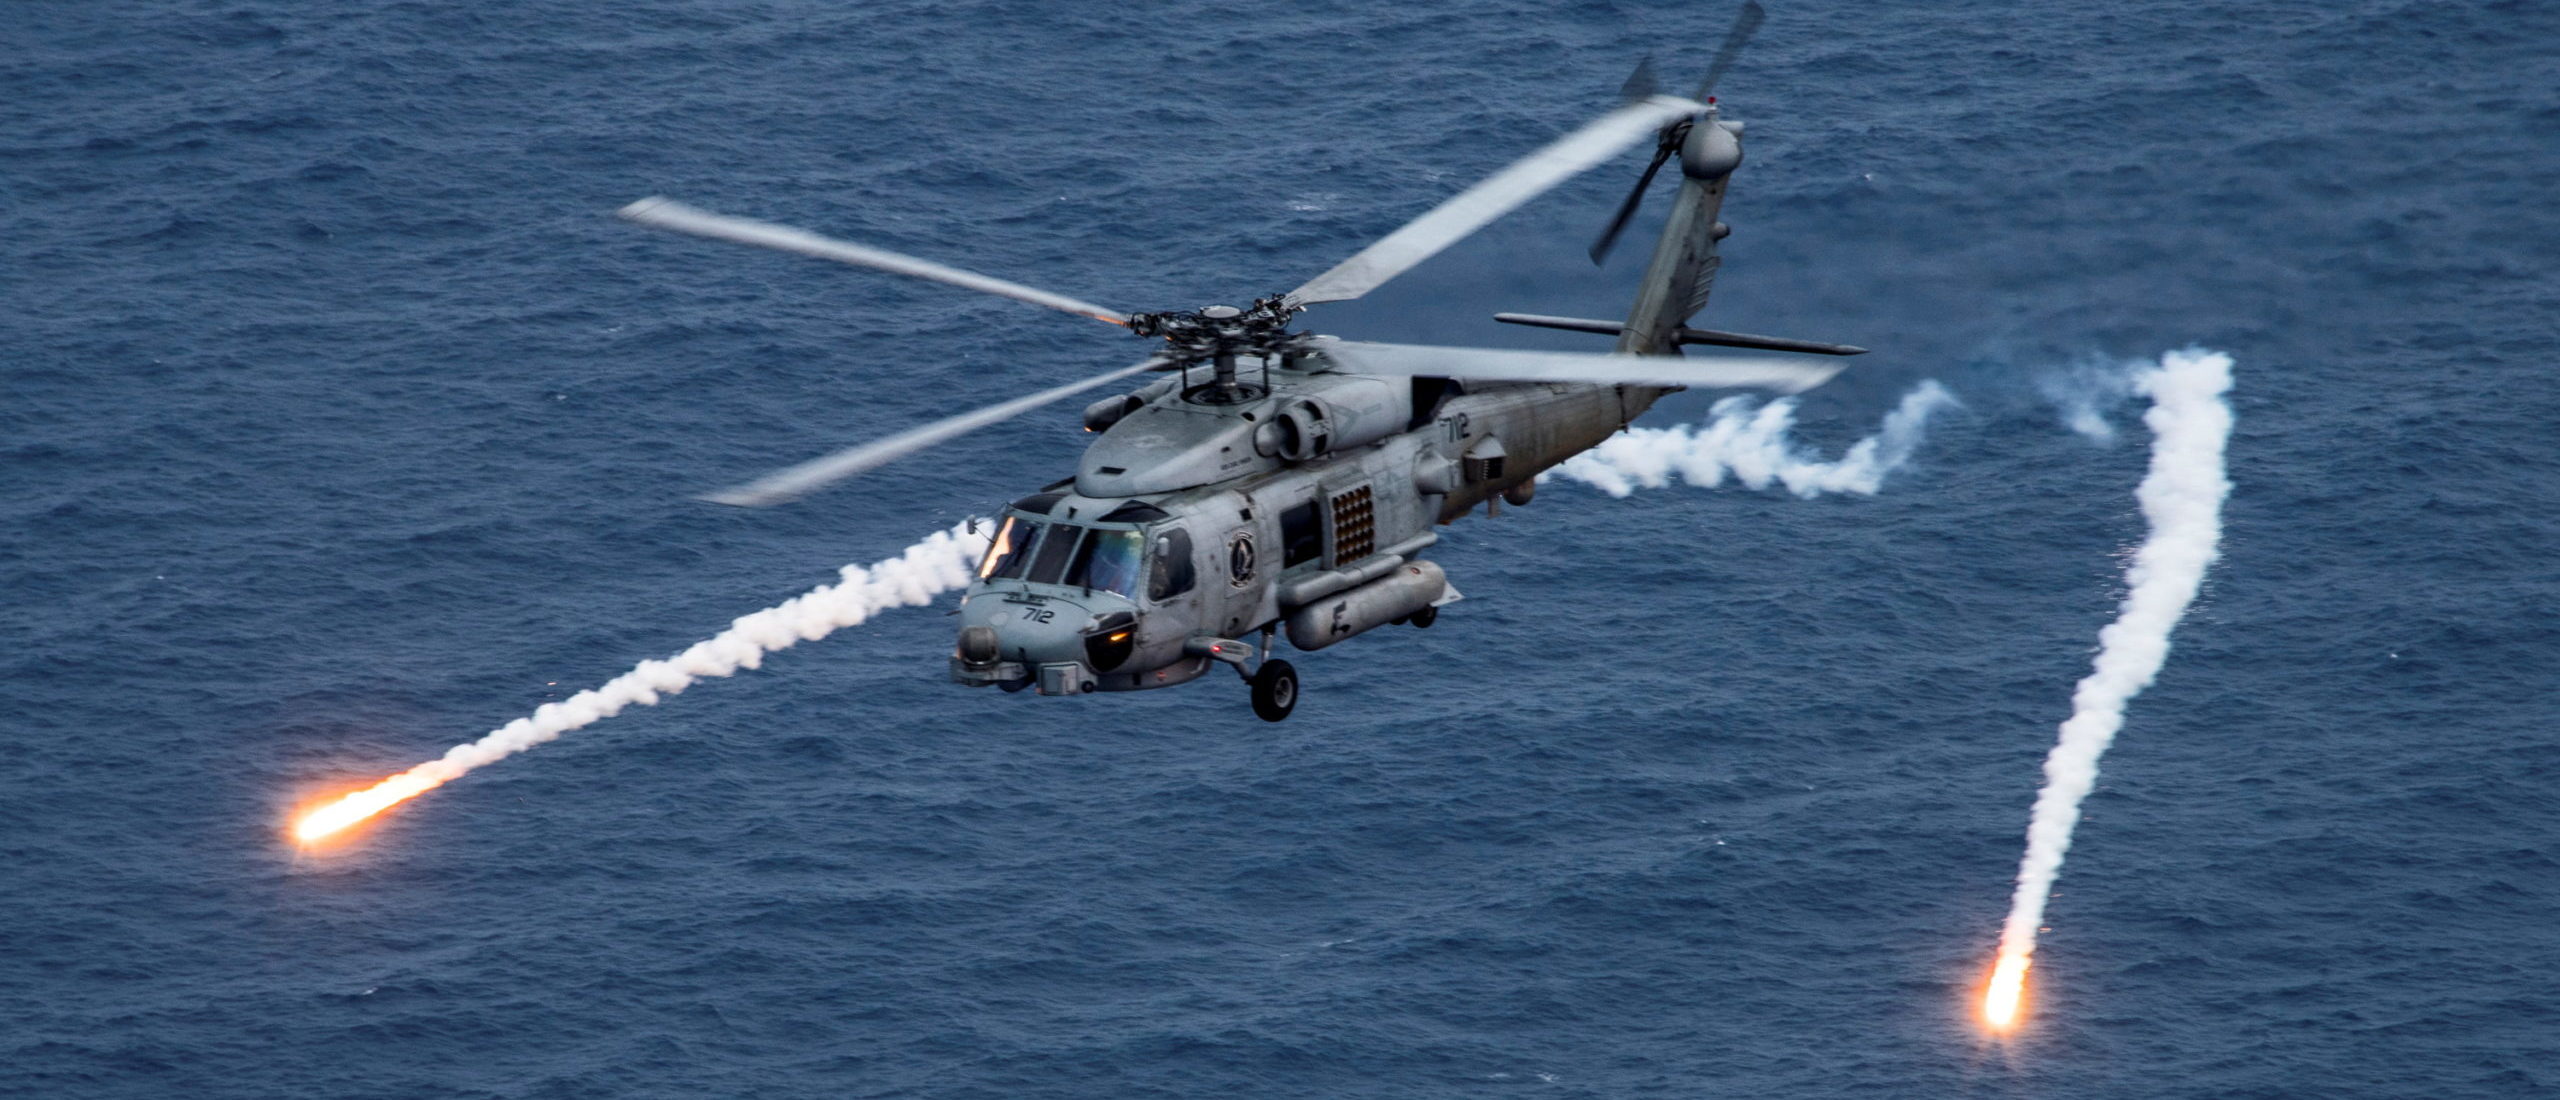 A U.S. Navy MH-60R Sea Hawk helicopter from the "Blue Hawks" of Helicopter Maritime Strike Squadron 78 fires chaff flares during a training exercise near the aircraft carrier USS Carl Vinson (CVN 70) in the Philippine Sea April 24, 2017. U.S. Navy/Mass Communication Specialist 2nd Class Sean M. Castellano/Handout via (REUTERS/File Photo)